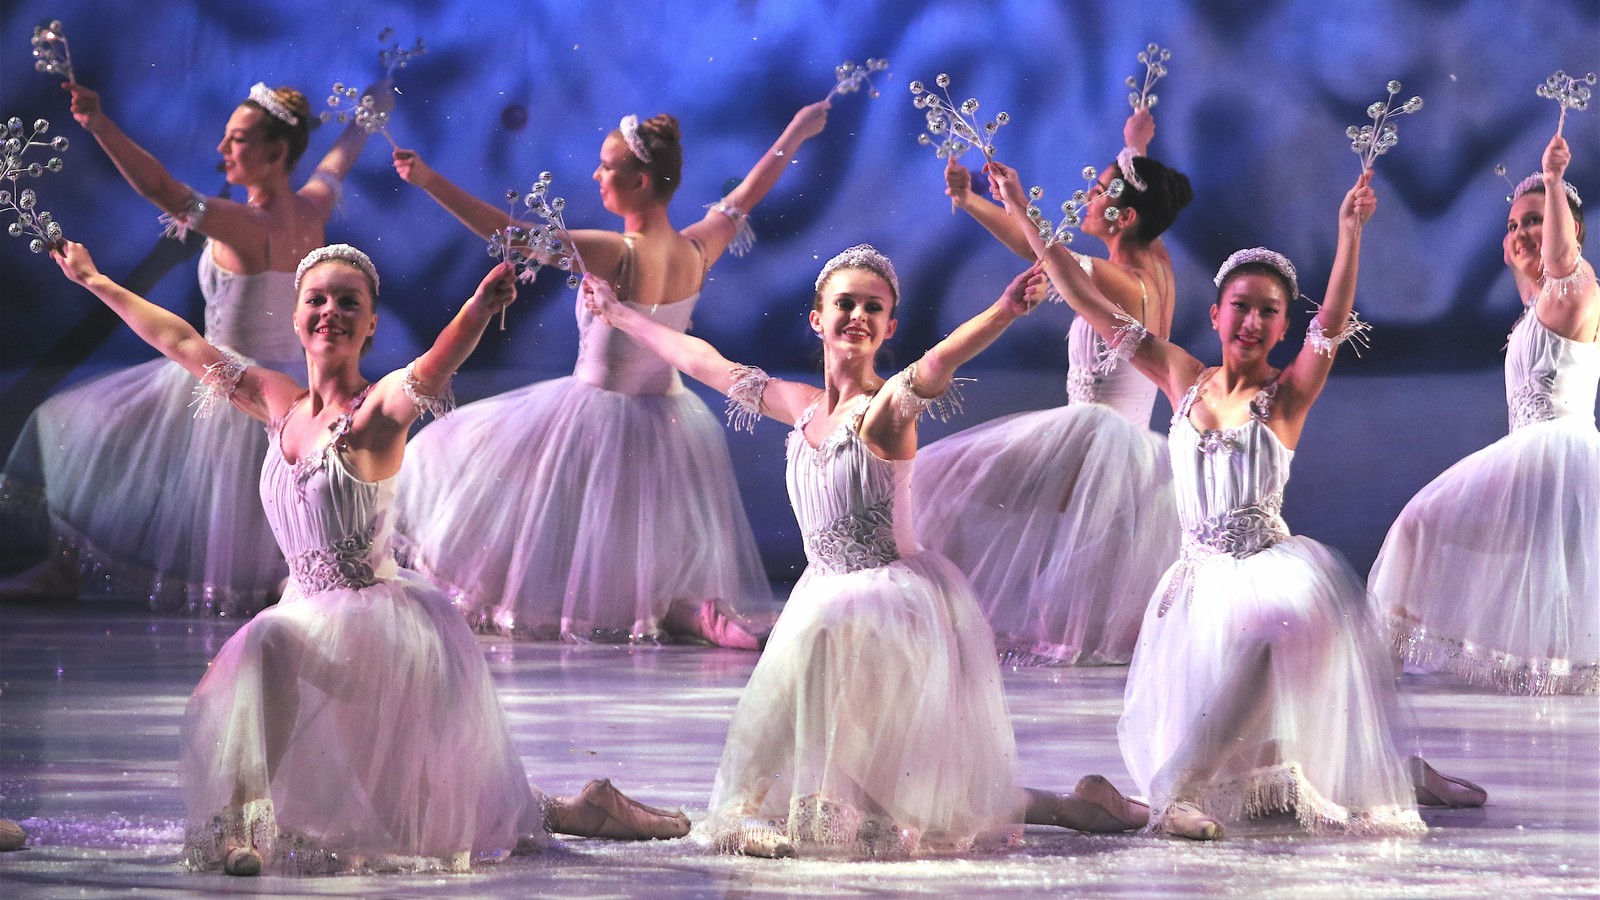 The Nutcracker Magic Continues for 25 Years at Pacific Festival Ballet